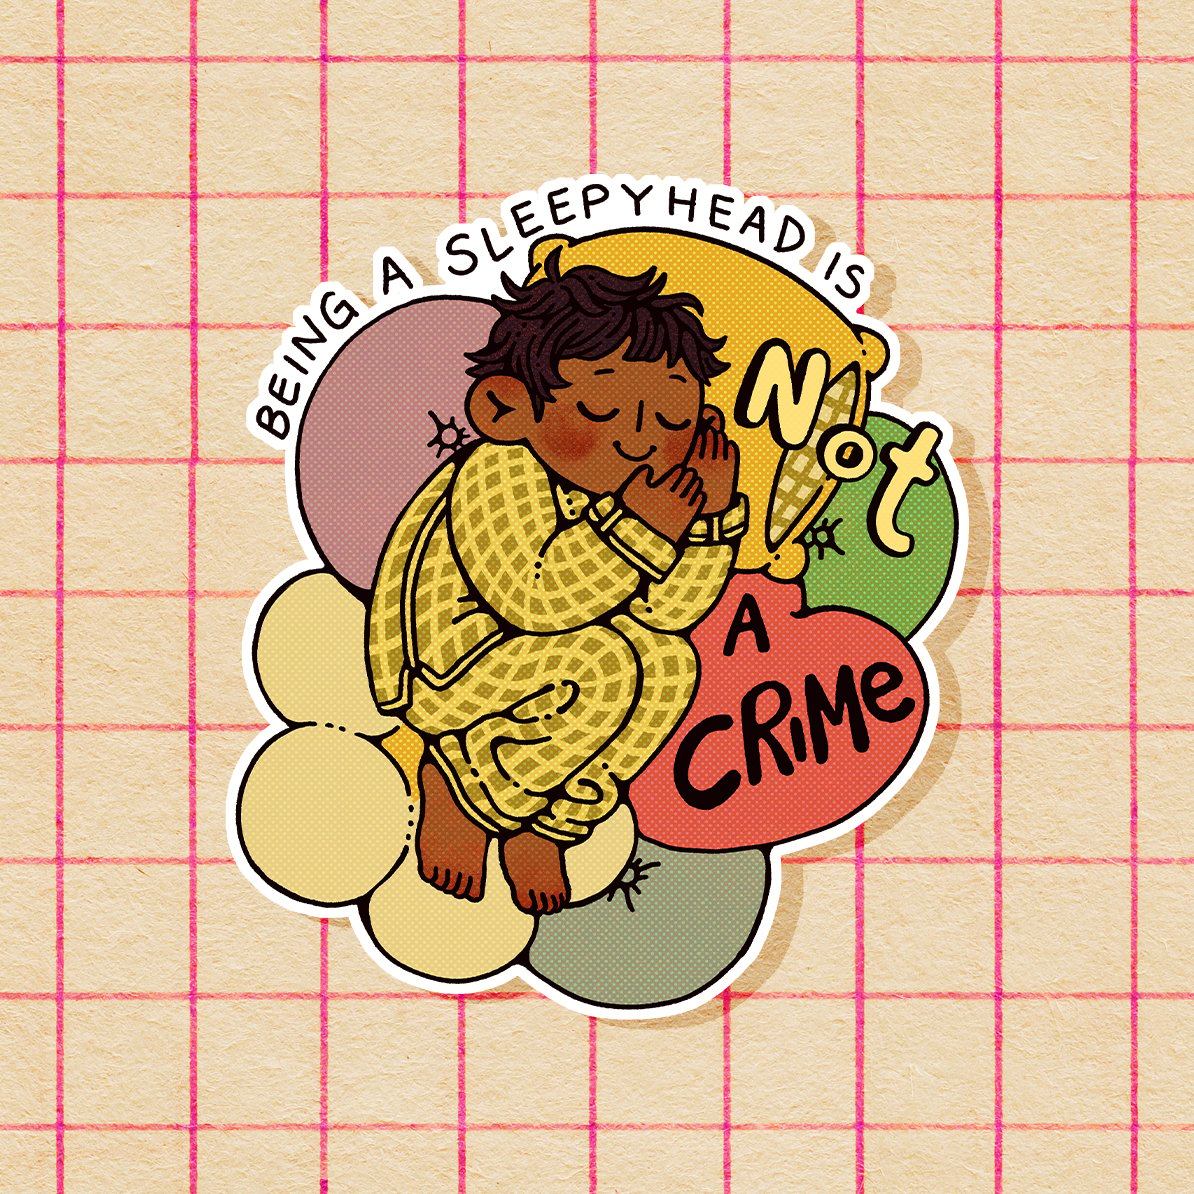 Being A Sleepyhead Is Not A Crime